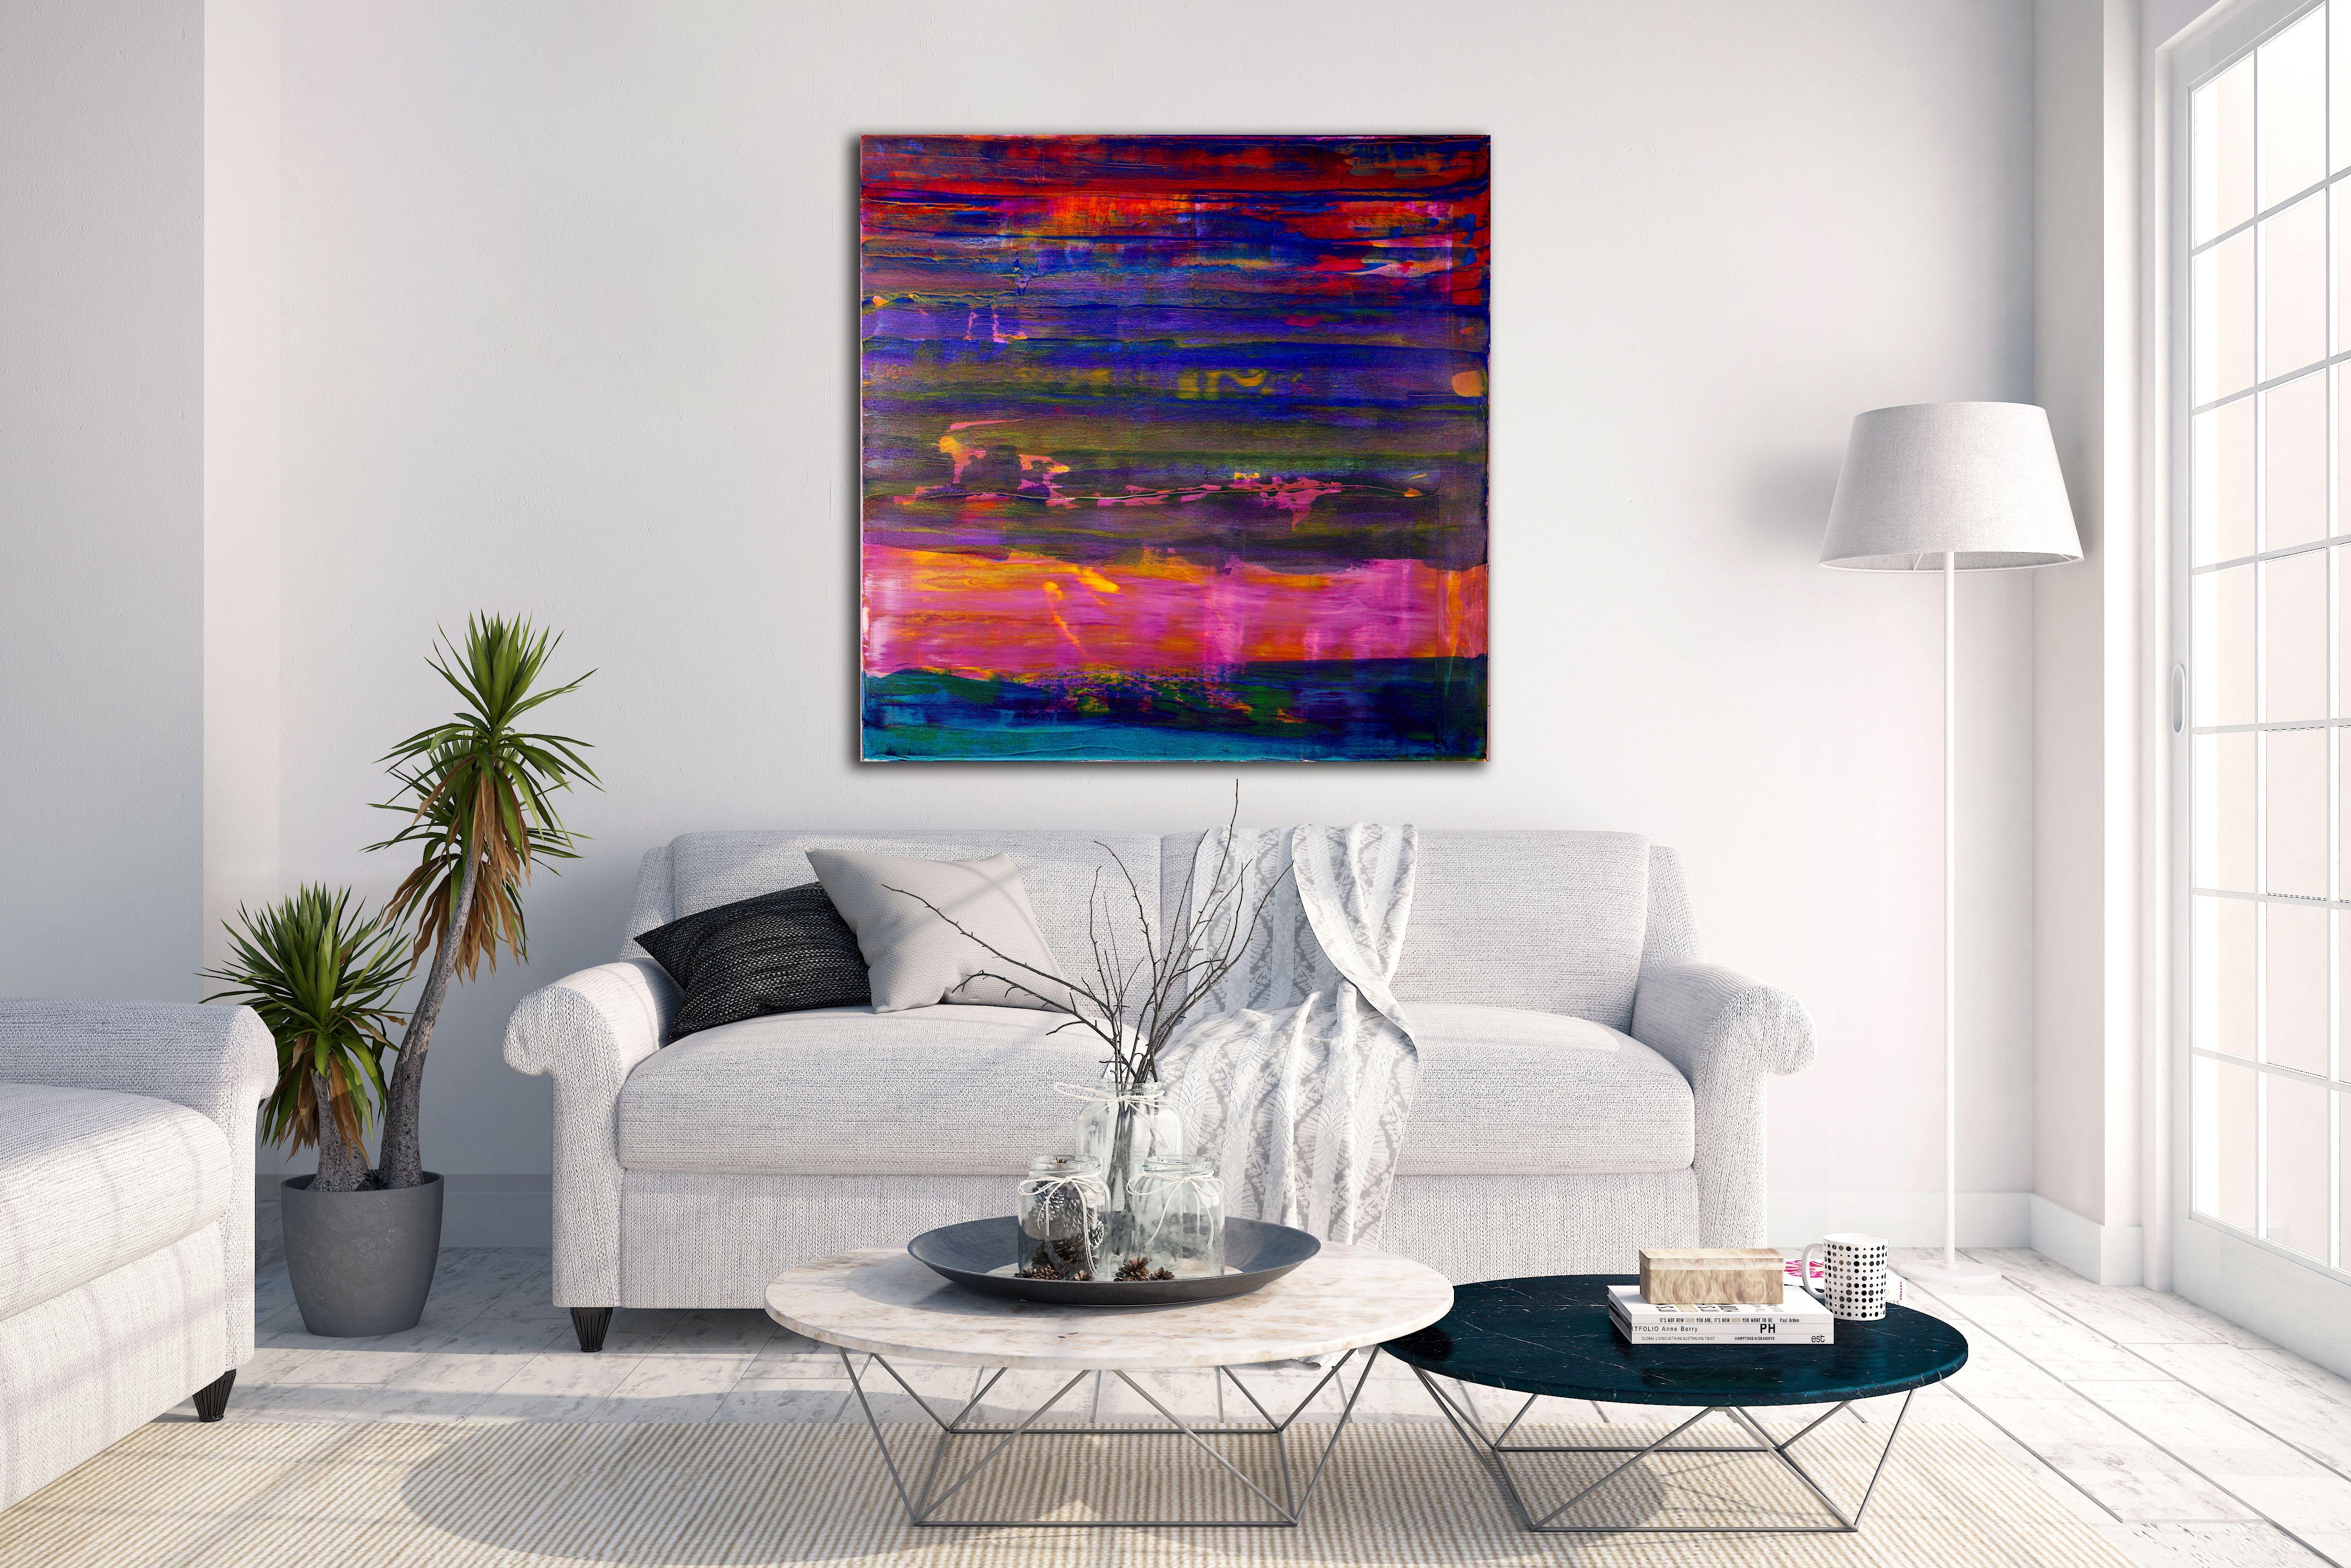 - READY TO HANG  - SIGNED CANVAS  - BOLD STATEMENT PIECE  - SIGNED CERTIFICATE OF AUTHENTICITY    Beautiful dark but vibrant colorfield with lots of depth and richness. This bold abstract painting has a neutral beige base background and heavy gloss